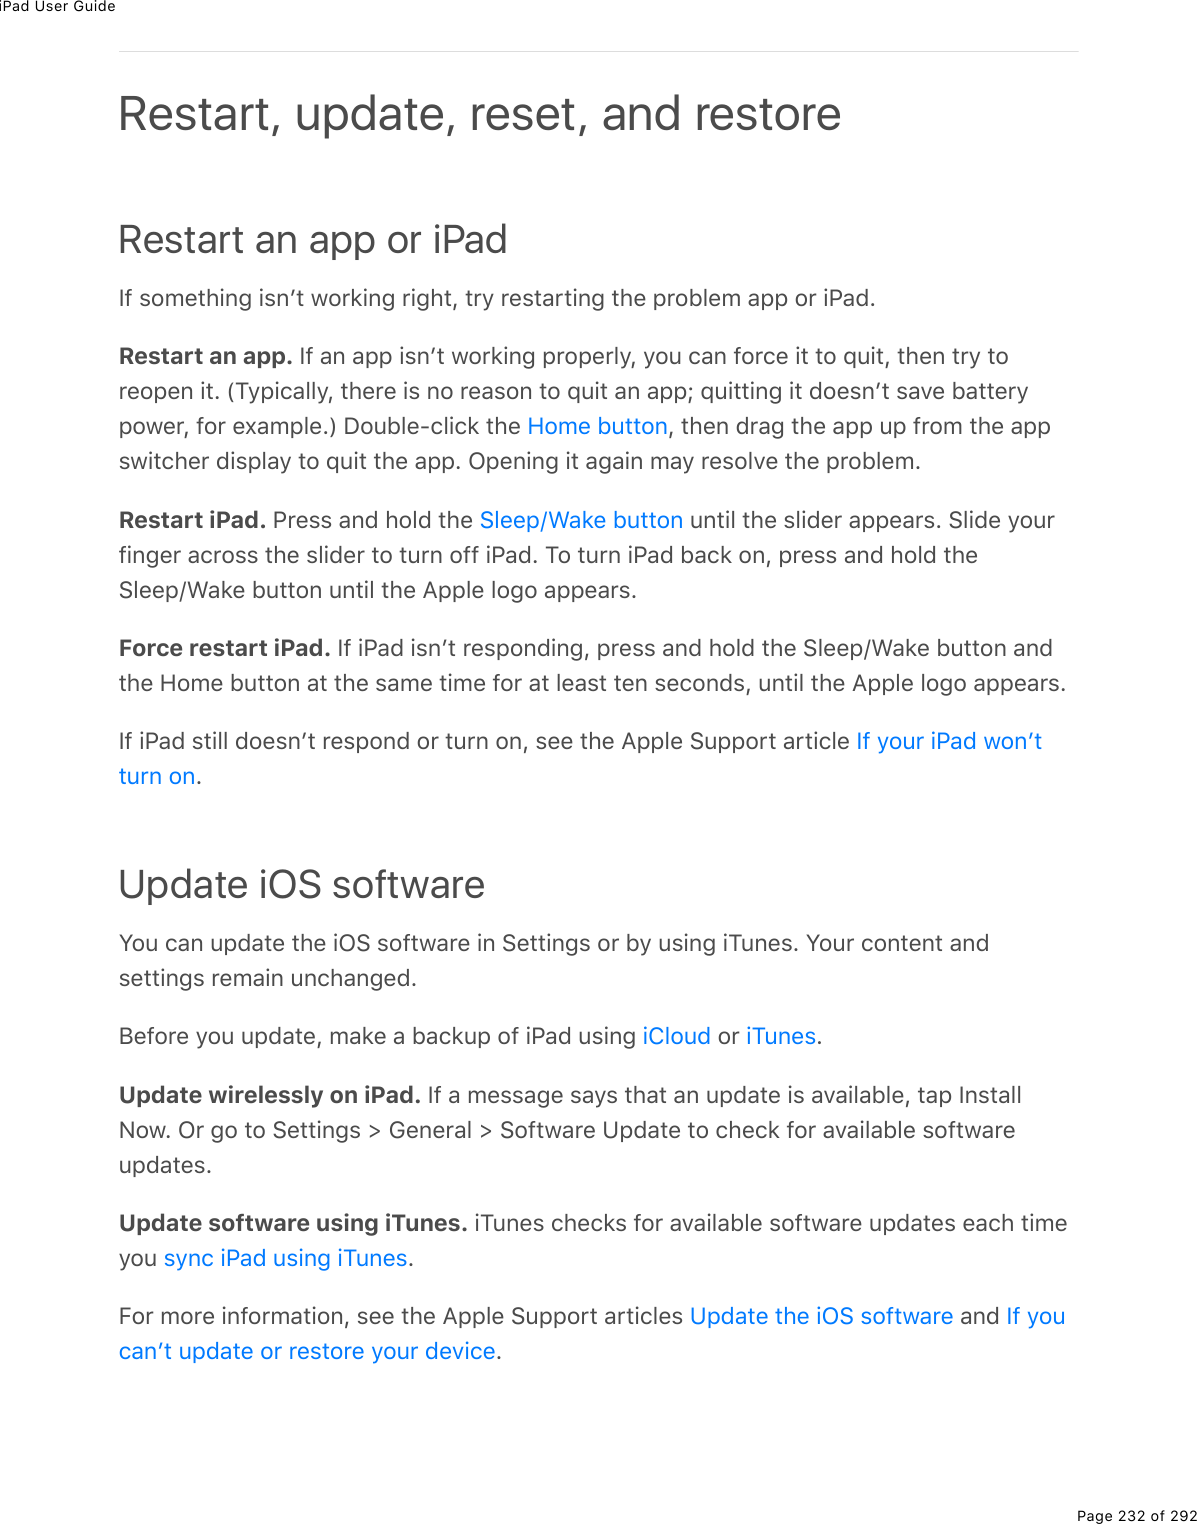 iPad User GuidePage 232 of 292Restart an app or iPadS9%&amp;2/(&quot;*.0;%.&amp;0F&quot;%12$&apos;.0;%$.;*&quot;L%&quot;$=%$(&amp;&quot;#$&quot;.0;%&quot;*(%-$253(/%#--%2$%.@#7ERestart an app. S9%#0%#--%.&amp;0F&quot;%12$&apos;.0;%-$2-($3=L%=2&gt;%)#0%92$)(%.&quot;%&quot;2%]&gt;.&quot;L%&quot;*(0%&quot;$=%&quot;2$(2-(0%.&quot;E%WM=-.)#33=L%&quot;*($(%.&amp;%02%$(#&amp;20%&quot;2%]&gt;.&quot;%#0%#--j%]&gt;.&quot;&quot;.0;%.&quot;%72(&amp;0F&quot;%&amp;#D(%5#&quot;&quot;($=-21($L%92$%(,#/-3(EX%P2&gt;53(Q)3.)&apos;%&quot;*(% L%&quot;*(0%7$#;%&quot;*(%#--%&gt;-%9$2/%&quot;*(%#--&amp;1.&quot;)*($%7.&amp;-3#=%&quot;2%]&gt;.&quot;%&quot;*(%#--E%G-(0.0;%.&quot;%#;#.0%/#=%$(&amp;23D(%&quot;*(%-$253(/ERestart iPad. @$(&amp;&amp;%#07%*237%&quot;*(% %&gt;0&quot;.3%&quot;*(%&amp;3.7($%#--(#$&amp;E%!3.7(%=2&gt;$9.0;($%#)$2&amp;&amp;%&quot;*(%&amp;3.7($%&quot;2%&quot;&gt;$0%299%.@#7E%M2%&quot;&gt;$0%.@#7%5#)&apos;%20L%-$(&amp;&amp;%#07%*237%&quot;*(!3((-R&lt;#&apos;(%5&gt;&quot;&quot;20%&gt;0&quot;.3%&quot;*(%?--3(%32;2%#--(#$&amp;EForce restart iPad. S9%.@#7%.&amp;0F&quot;%$(&amp;-207.0;L%-$(&amp;&amp;%#07%*237%&quot;*(%!3((-R&lt;#&apos;(%5&gt;&quot;&quot;20%#07&quot;*(%A2/(%5&gt;&quot;&quot;20%#&quot;%&quot;*(%&amp;#/(%&quot;./(%92$%#&quot;%3(#&amp;&quot;%&quot;(0%&amp;()207&amp;L%&gt;0&quot;.3%&quot;*(%?--3(%32;2%#--(#$&amp;ES9%.@#7%&amp;&quot;.33%72(&amp;0F&quot;%$(&amp;-207%2$%&quot;&gt;$0%20L%&amp;((%&quot;*(%?--3(%!&gt;--2$&quot;%#$&quot;.)3(%EUpdate iOS softwareY2&gt;%)#0%&gt;-7#&quot;(%&quot;*(%.G!%&amp;29&quot;1#$(%.0%!(&quot;&quot;.0;&amp;%2$%5=%&gt;&amp;.0;%.M&gt;0(&amp;E%Y2&gt;$%)20&quot;(0&quot;%#07&amp;(&quot;&quot;.0;&amp;%$(/#.0%&gt;0)*#0;(7EJ(92$(%=2&gt;%&gt;-7#&quot;(L%/#&apos;(%#%5#)&apos;&gt;-%29%.@#7%&gt;&amp;.0;% %2$% EUpdate wirelessly on iPad. S9%#%/(&amp;&amp;#;(%&amp;#=&amp;%&quot;*#&quot;%#0%&gt;-7#&quot;(%.&amp;%#D#.3#53(L%&quot;#-%S0&amp;&quot;#33C21E%G$%;2%&quot;2%!(&quot;&quot;.0;&amp;%[%6(0($#3%[%!29&quot;1#$(%Z-7#&quot;(%&quot;2%)*()&apos;%92$%#D#.3#53(%&amp;29&quot;1#$(&gt;-7#&quot;(&amp;EUpdate software using iTunes. .M&gt;0(&amp;%)*()&apos;&amp;%92$%#D#.3#53(%&amp;29&quot;1#$(%&gt;-7#&quot;(&amp;%(#)*%&quot;./(=2&gt;% EB2$%/2$(%.092$/#&quot;.20L%&amp;((%&quot;*(%?--3(%!&gt;--2$&quot;%#$&quot;.)3(&amp;% %#07%ERestart, update, reset, and restoreA2/(%5&gt;&quot;&quot;20!3((-R&lt;#&apos;(%5&gt;&quot;&quot;20S9%=2&gt;$%.@#7%120F&quot;&quot;&gt;$0%20.432&gt;7 .M&gt;0(&amp;&amp;=0)%.@#7%&gt;&amp;.0;%.M&gt;0(&amp;Z-7#&quot;(%&quot;*(%.G!%&amp;29&quot;1#$( S9%=2&gt;)#0F&quot;%&gt;-7#&quot;(%2$%$(&amp;&quot;2$(%=2&gt;$%7(D.)(